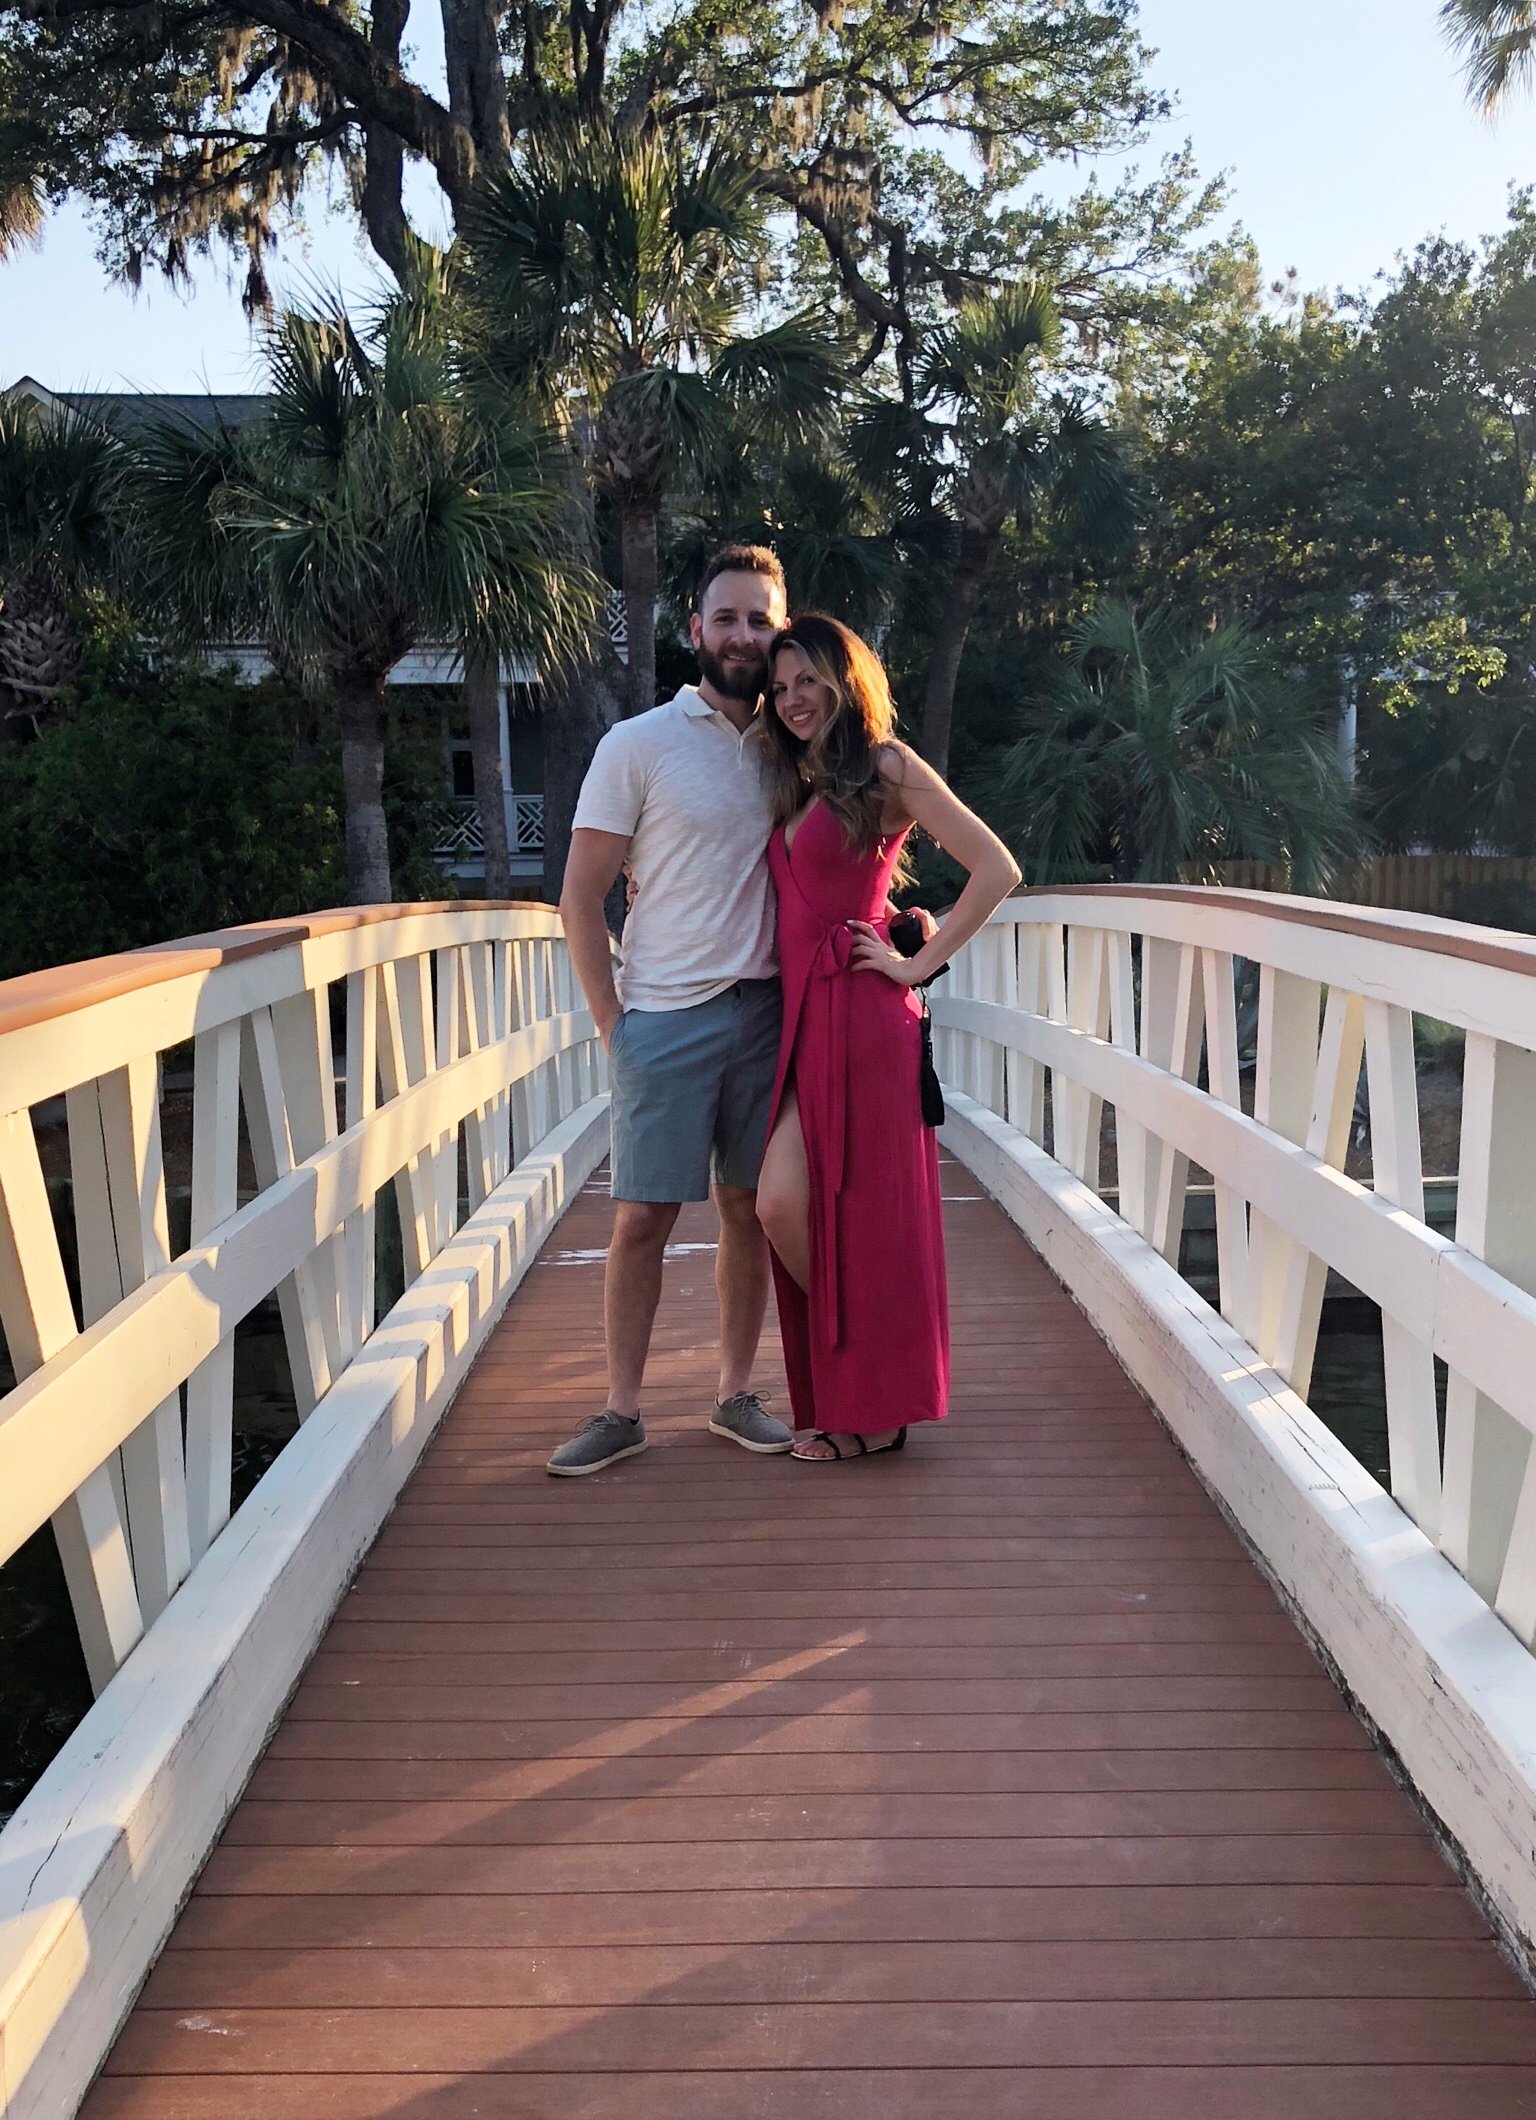 Lifestyle Blogger Chocolate and Lace shares her family vacation to Hilton Head Island with tons of photos. 